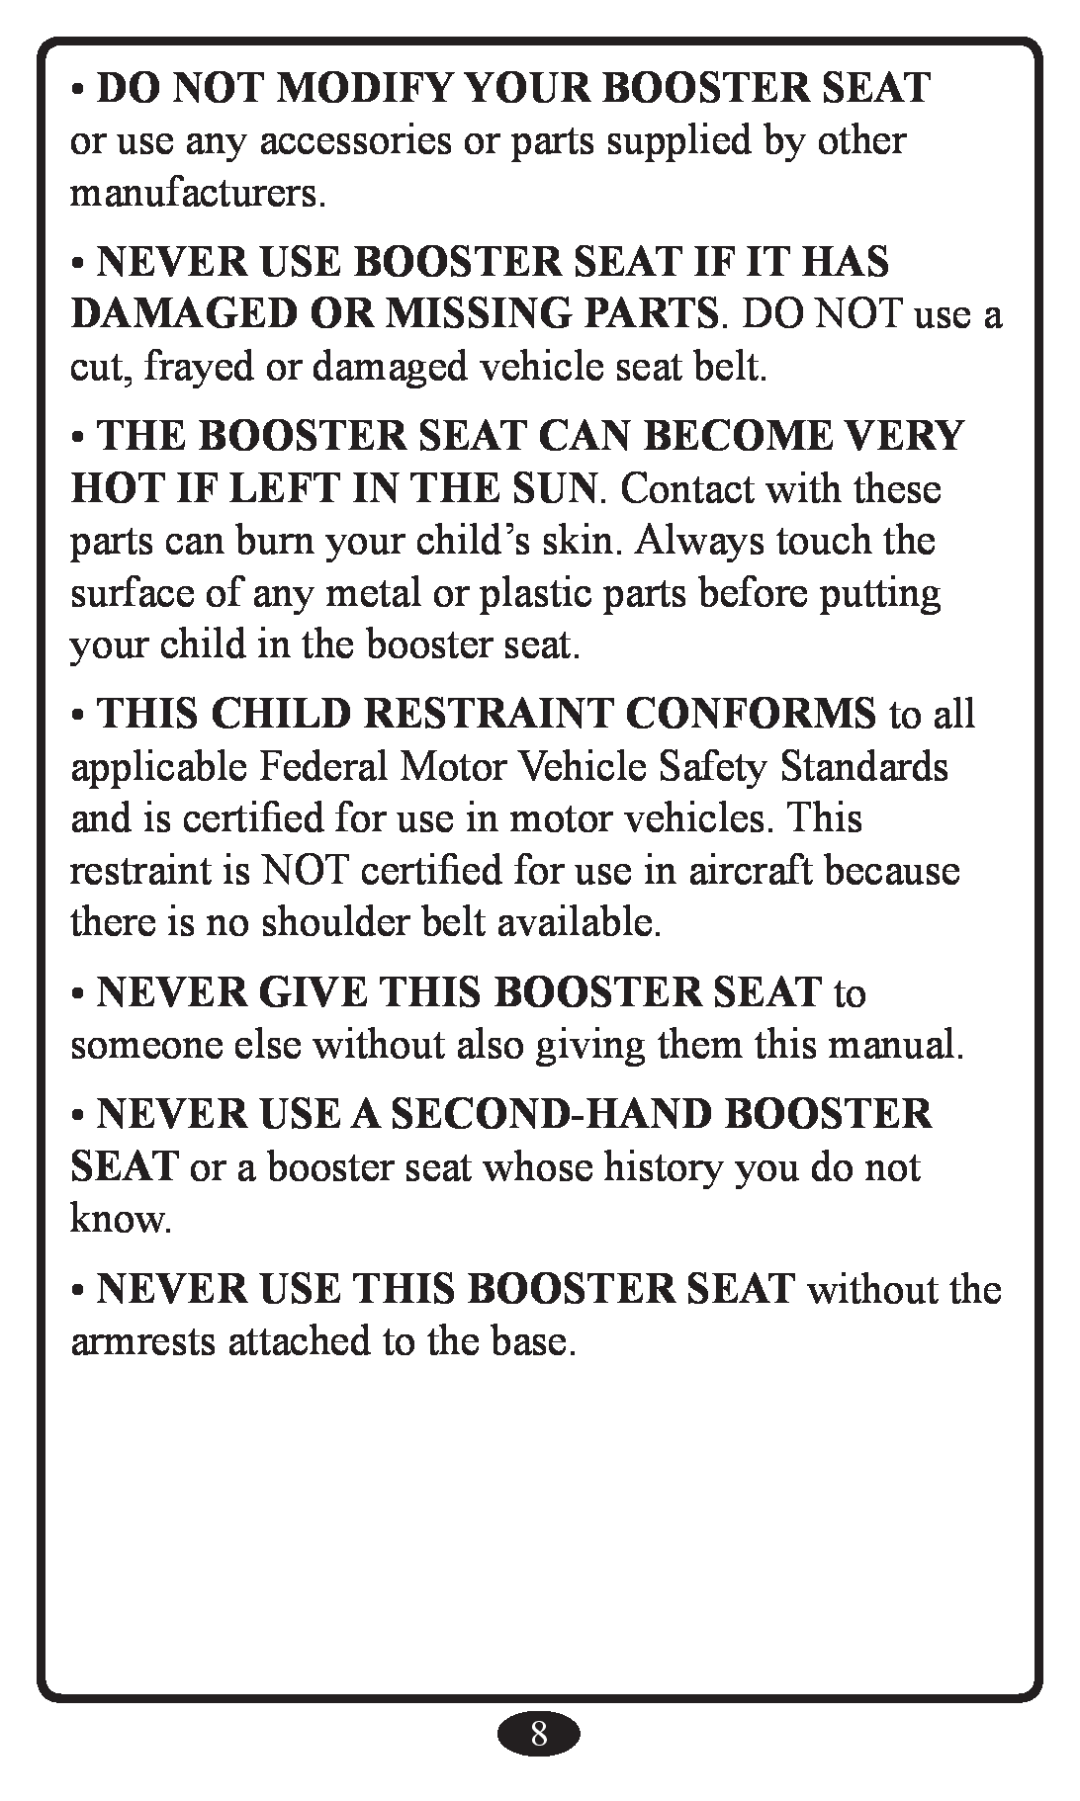 Graco Booster Seat owner manual NEVER USE THIS BOOSTER SEAT without the armrests attached to the base 